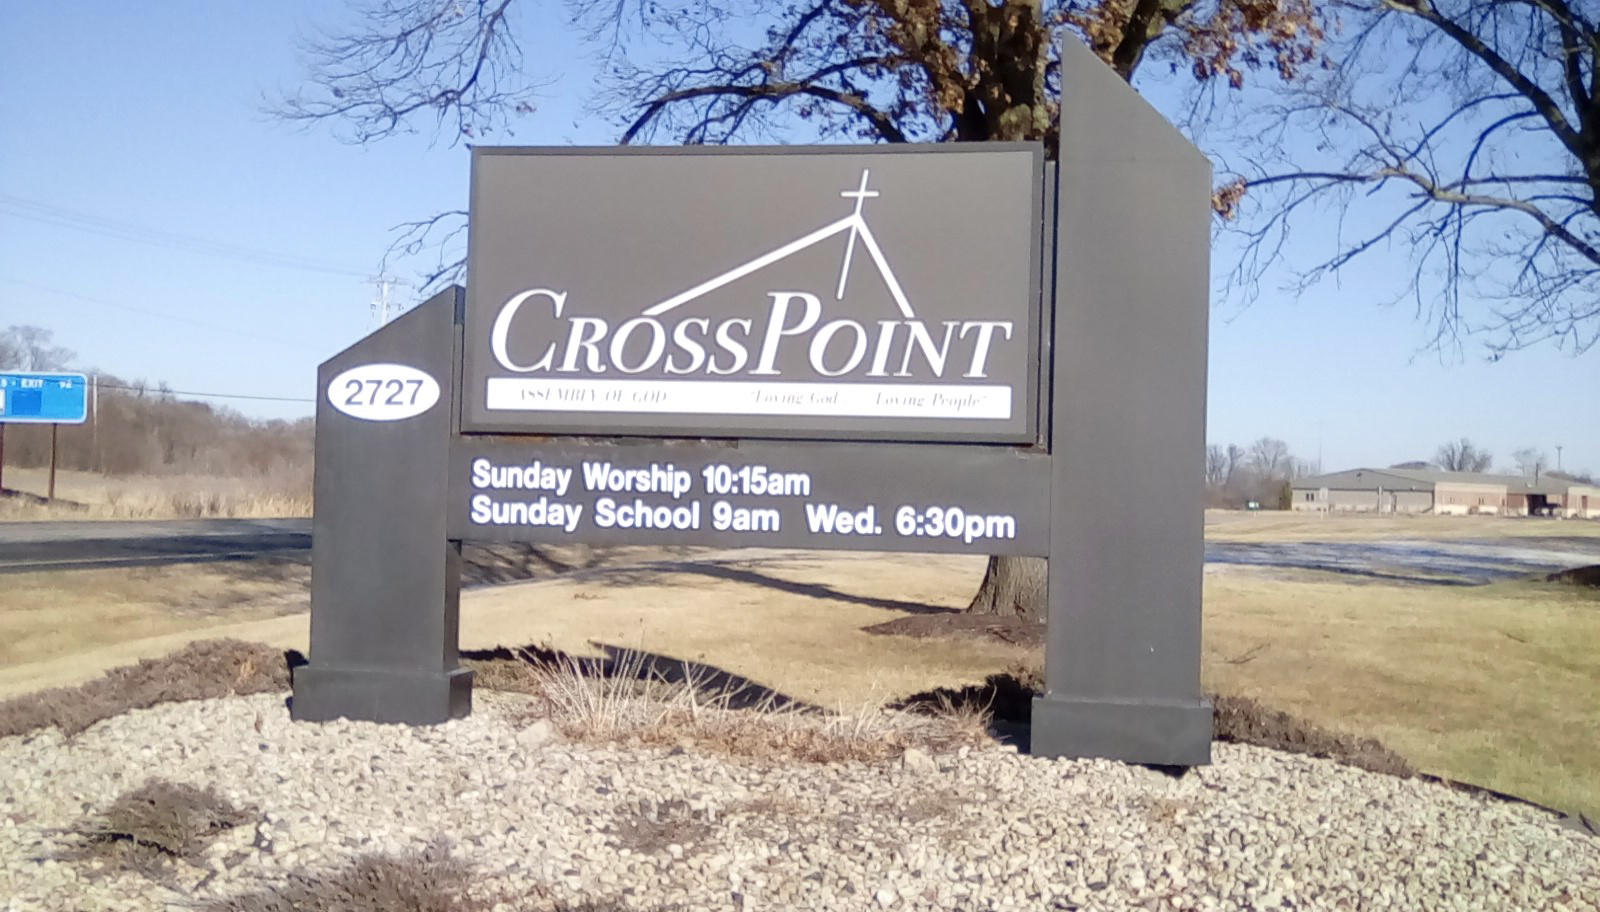 CrossPoint Assembly of God Church